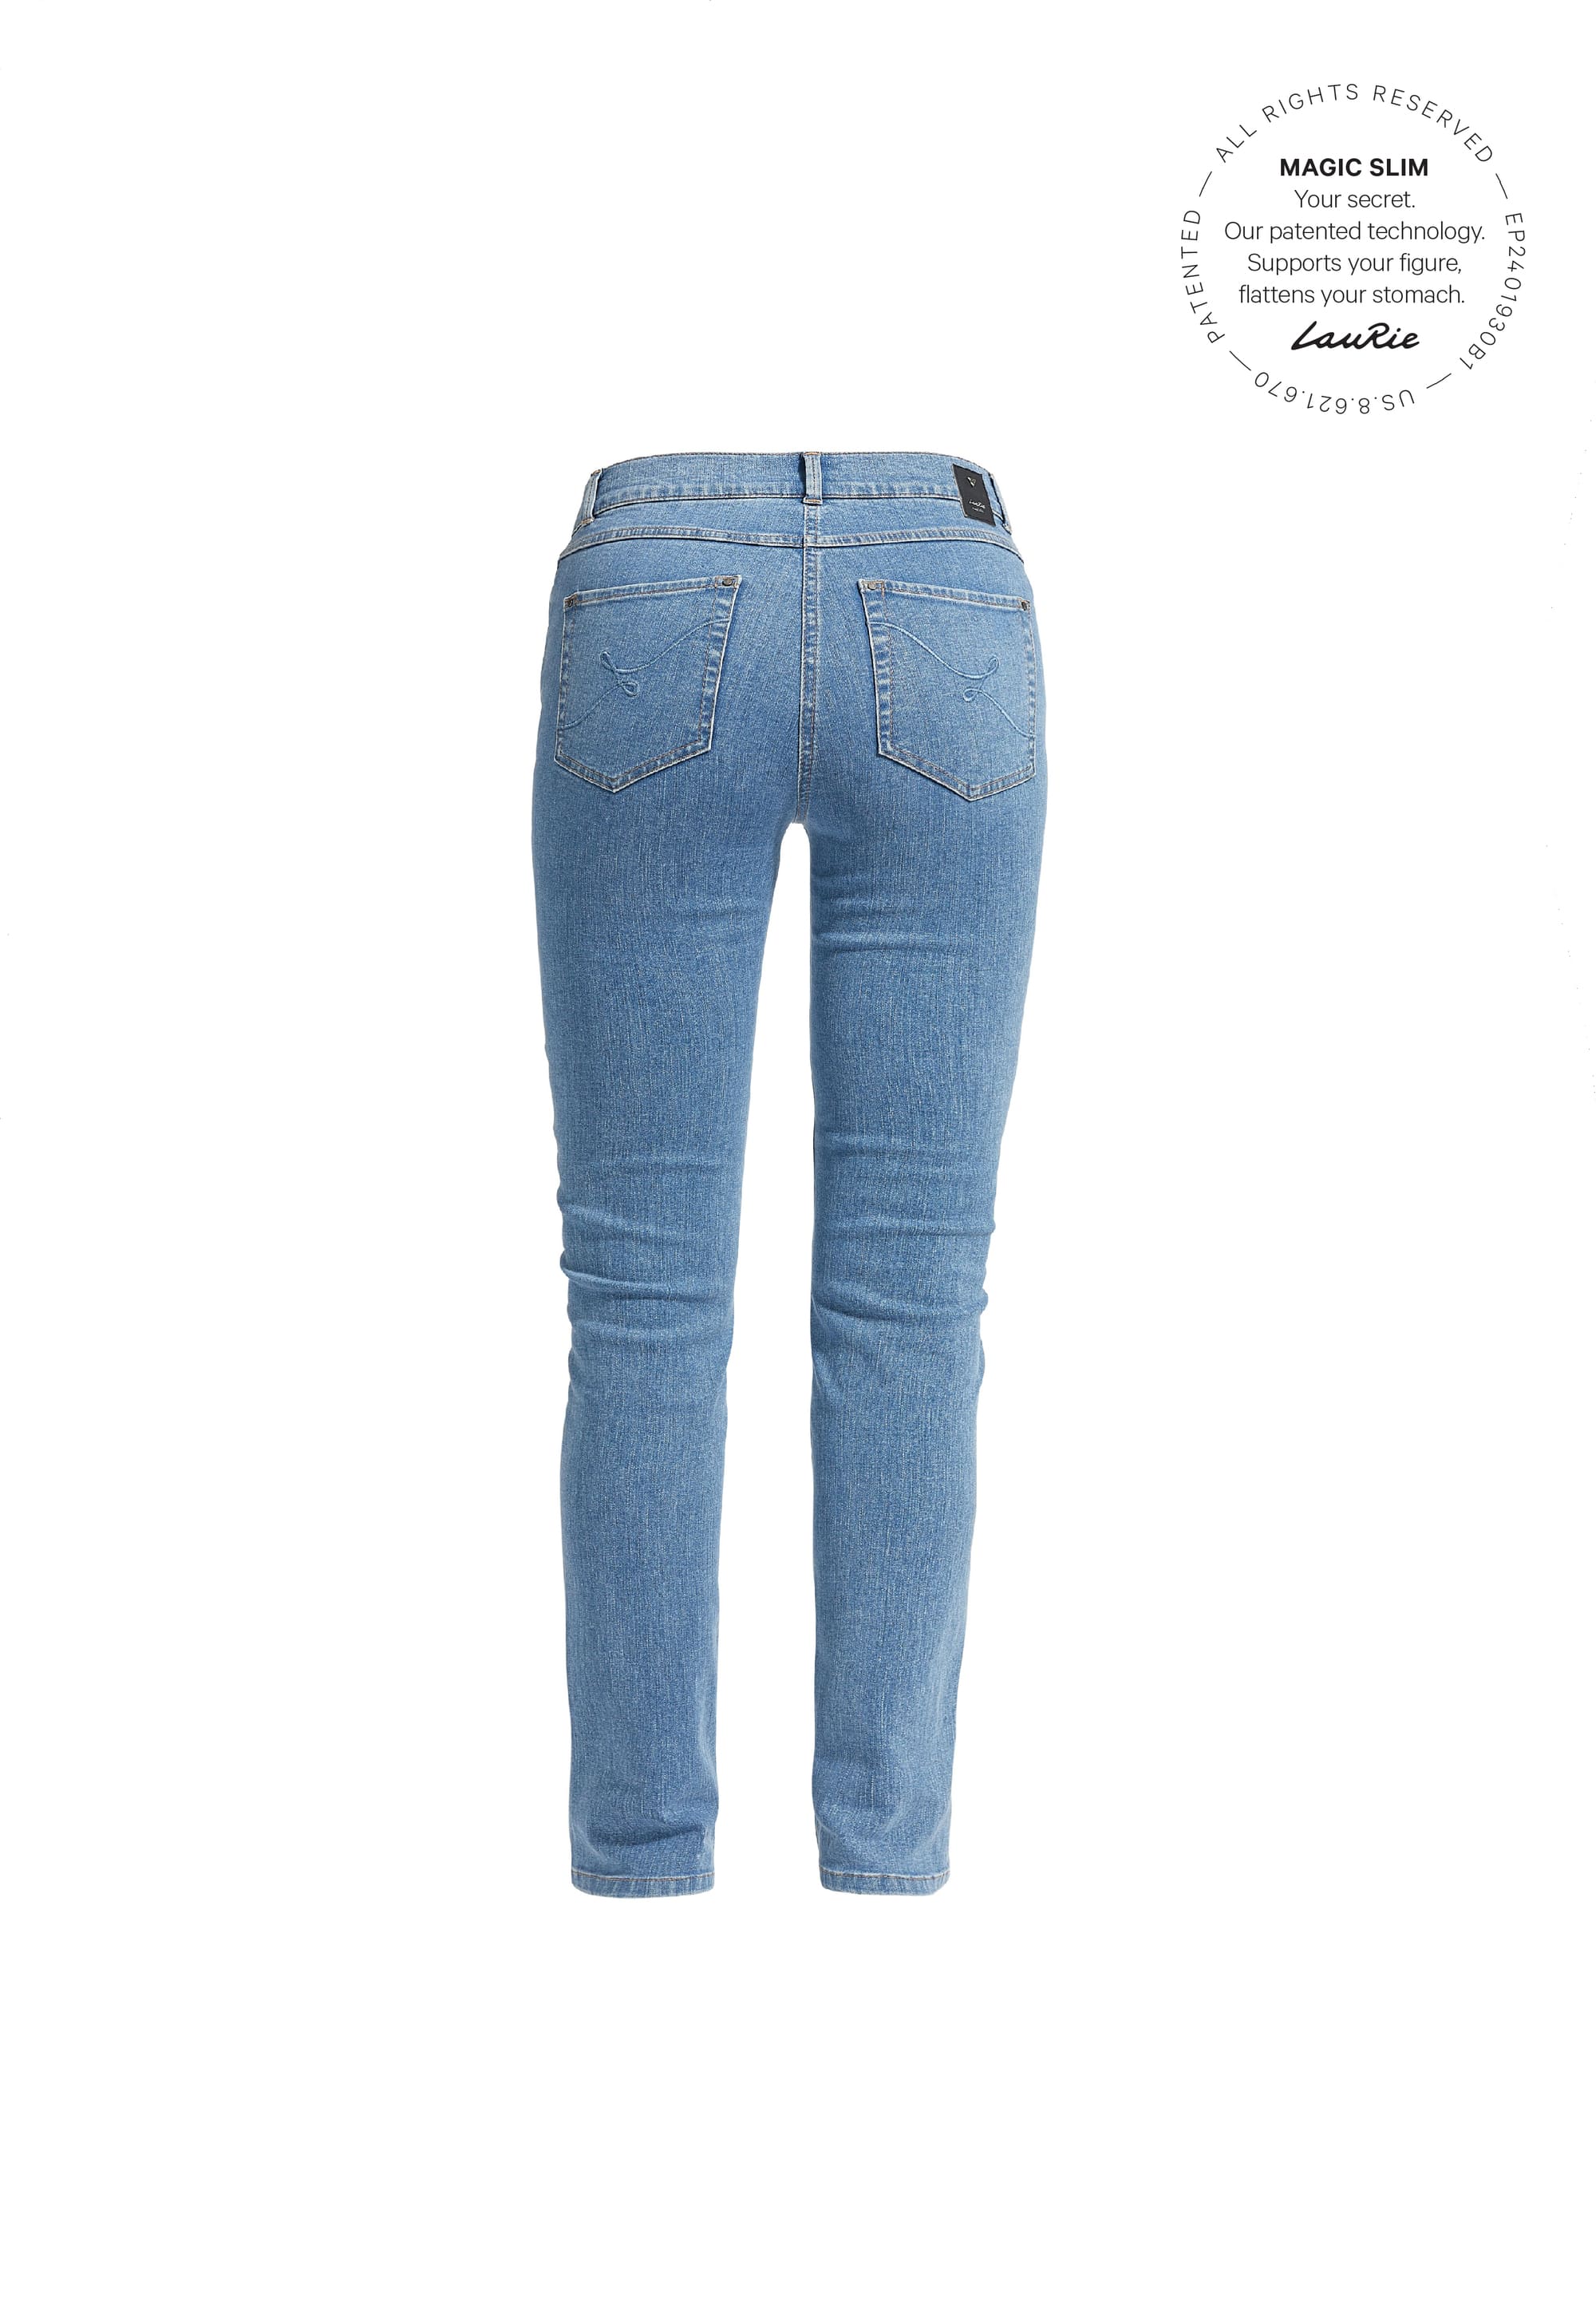 Magic Slim Jeans, Shop our popular jeans here